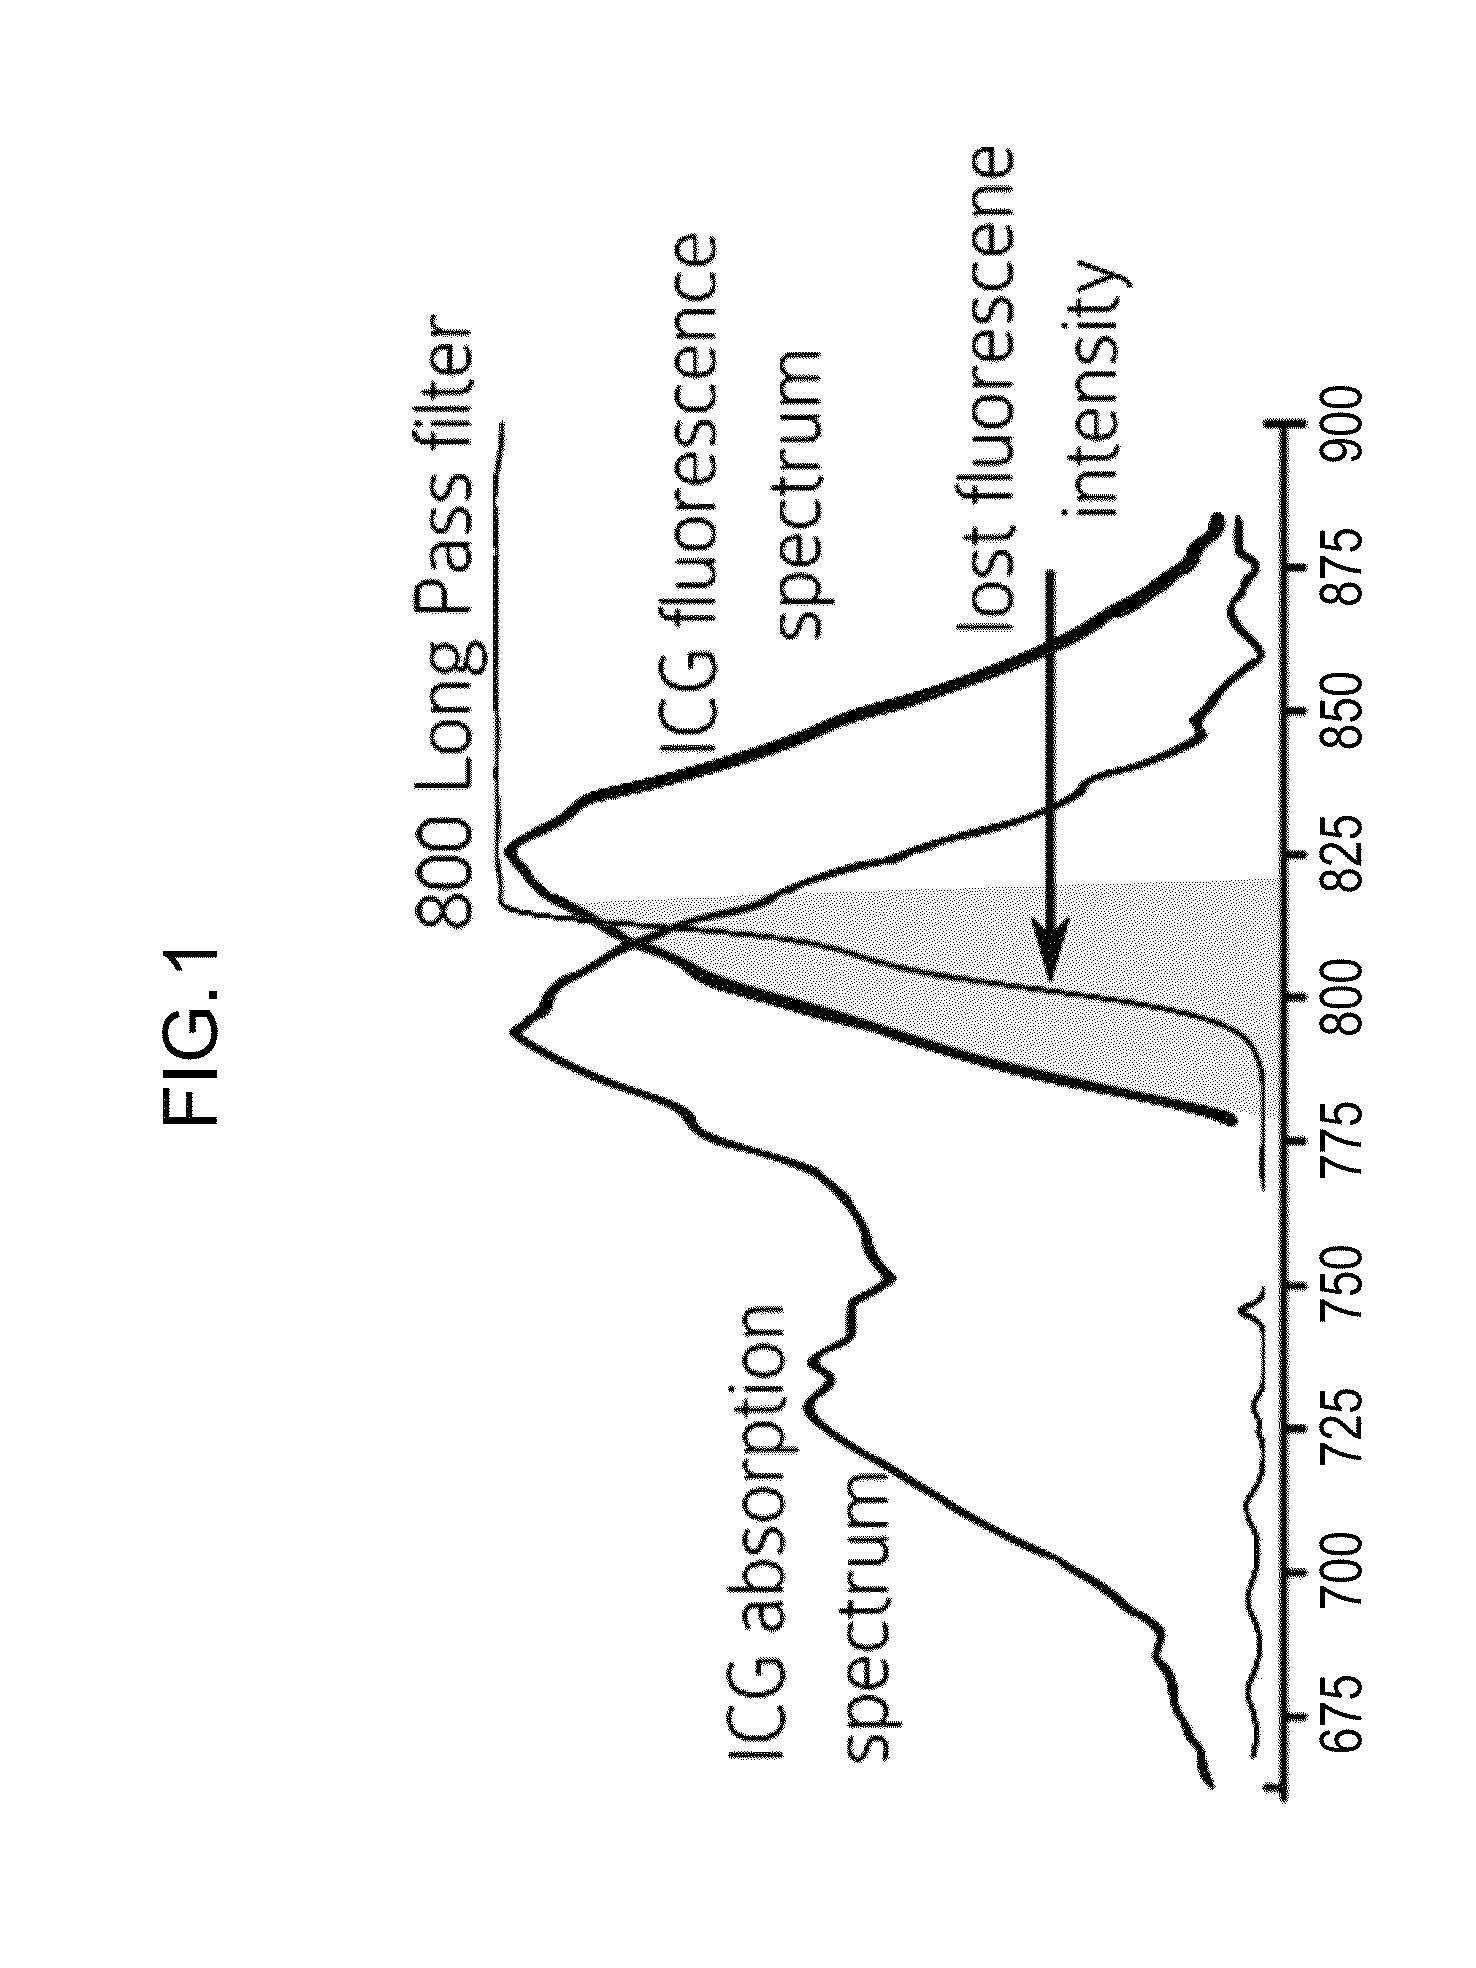 Systems and methods for recording simultaneously visible light image and infrared light image from fluorophores